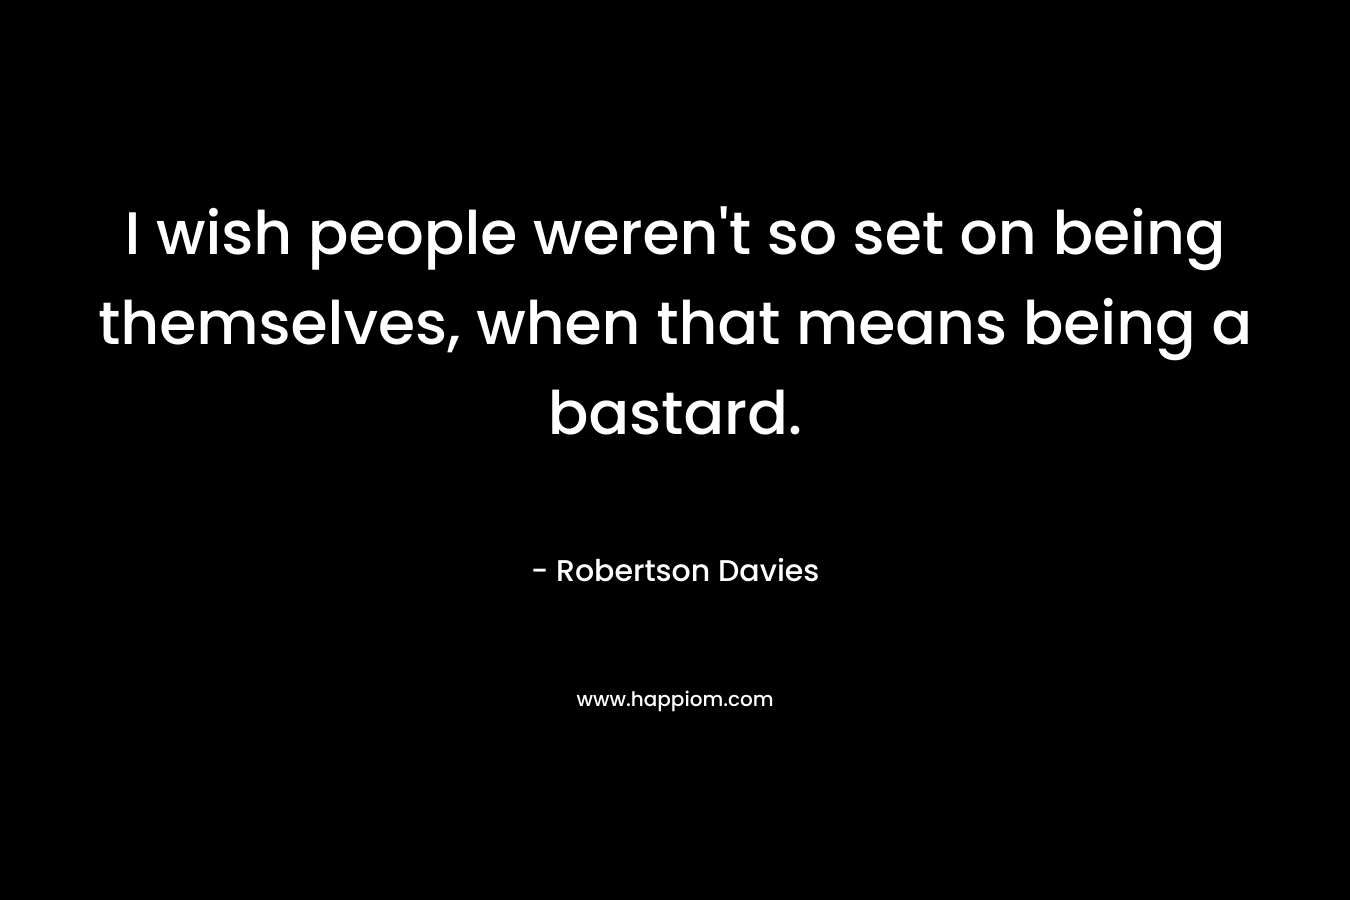 I wish people weren’t so set on being themselves, when that means being a bastard. – Robertson Davies